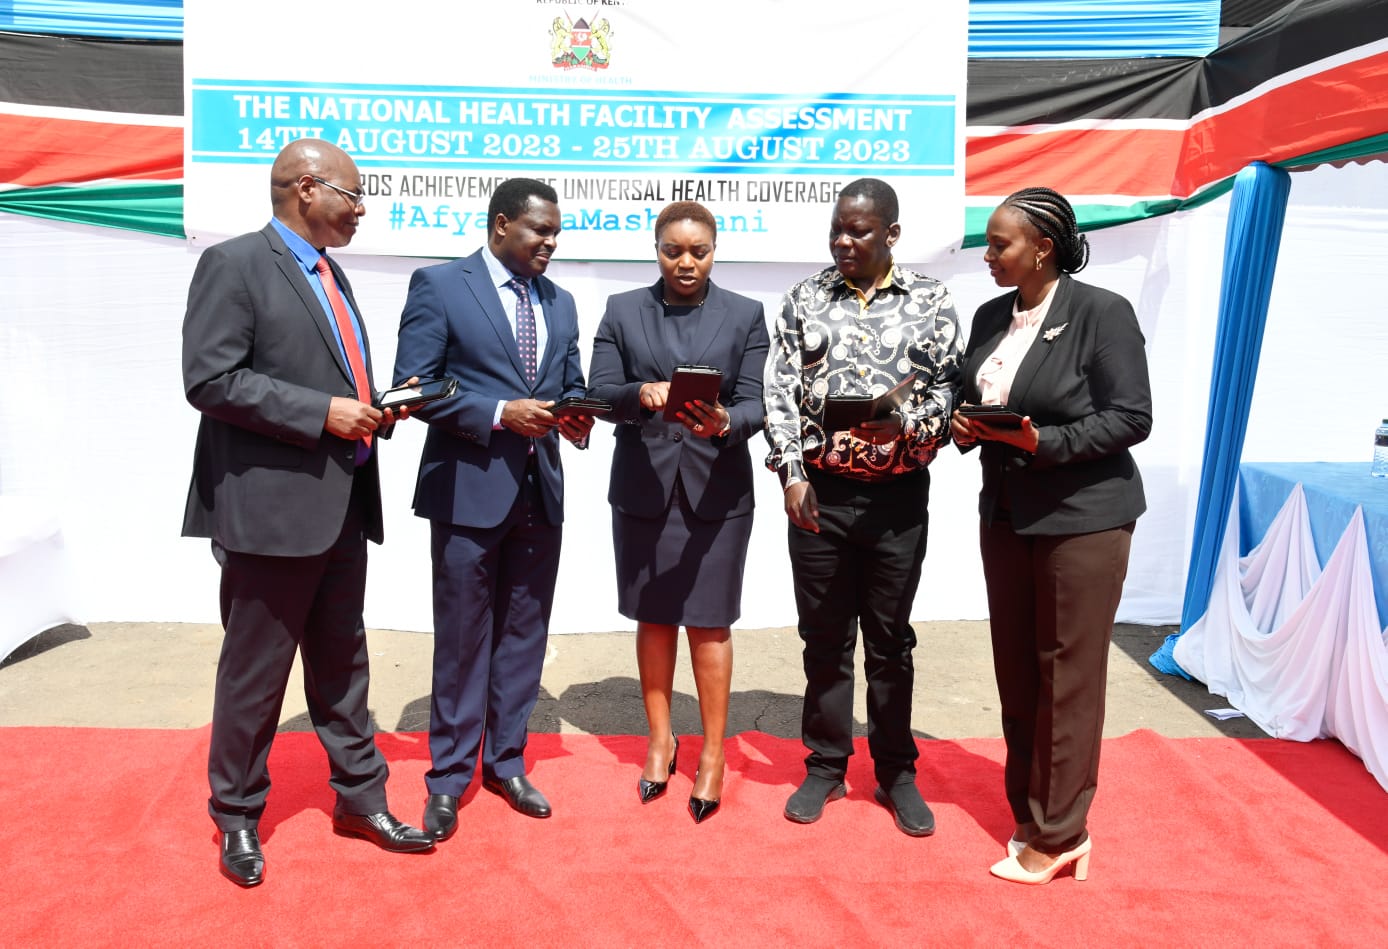 Government Launches Nationwide Health Facility Assessment Census to Enhance Service Delivery